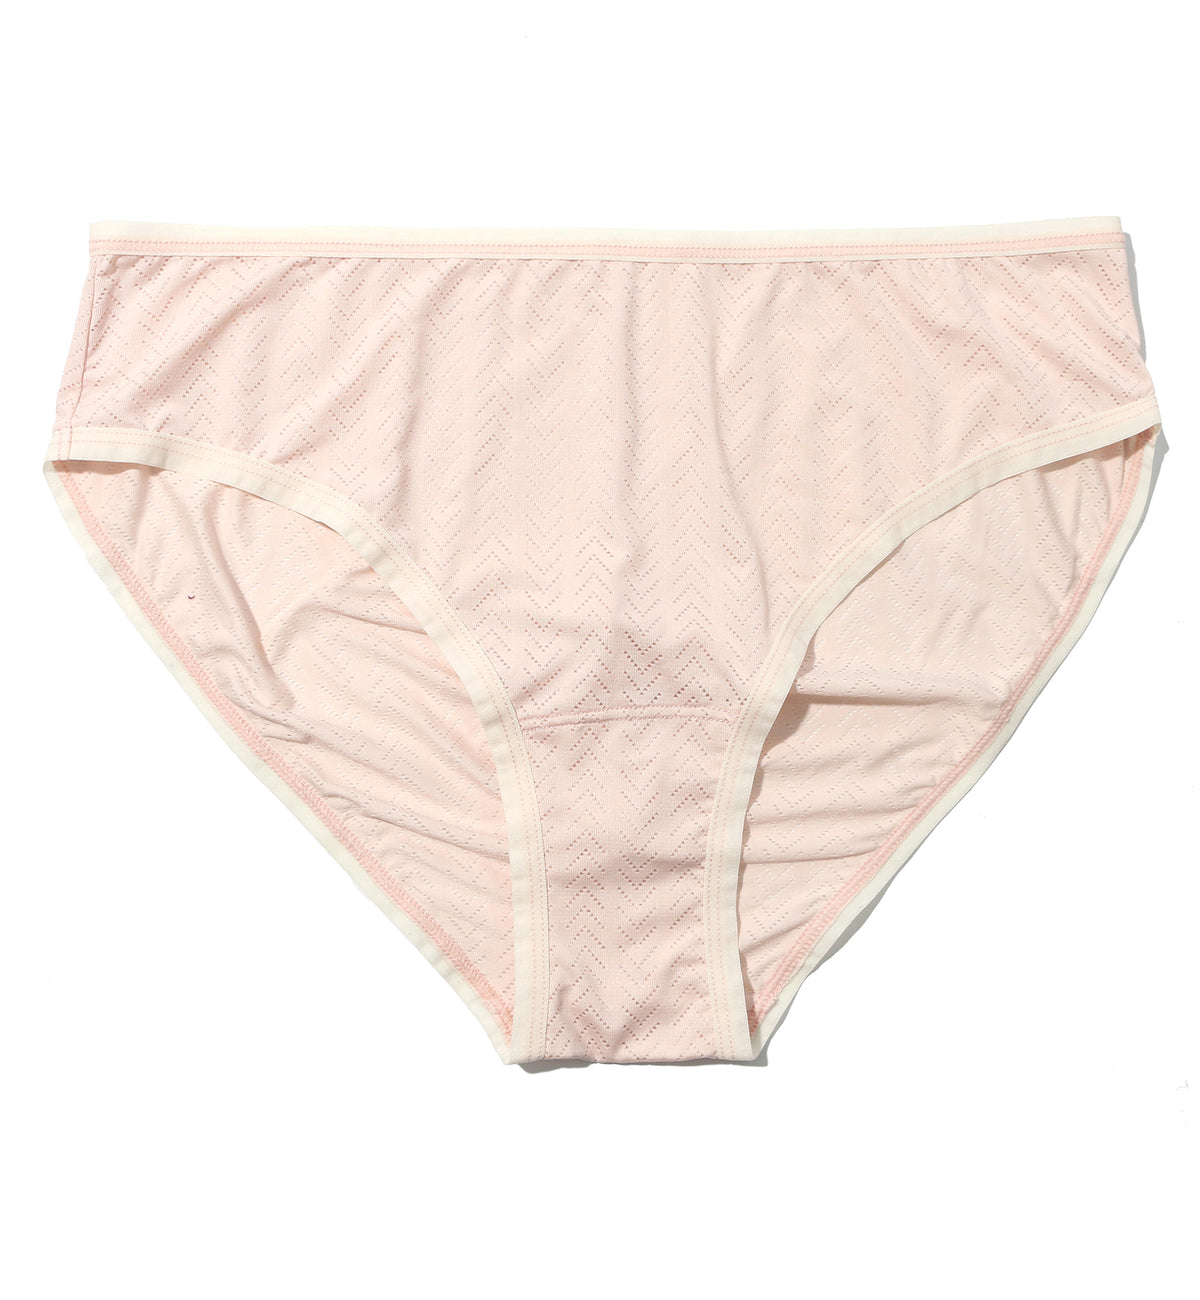 Hanky Panky MoveCalm Ruched Back Brief (2P2184),XS,Pearl/Marshmallow - Pearl/Marshmallow,XS